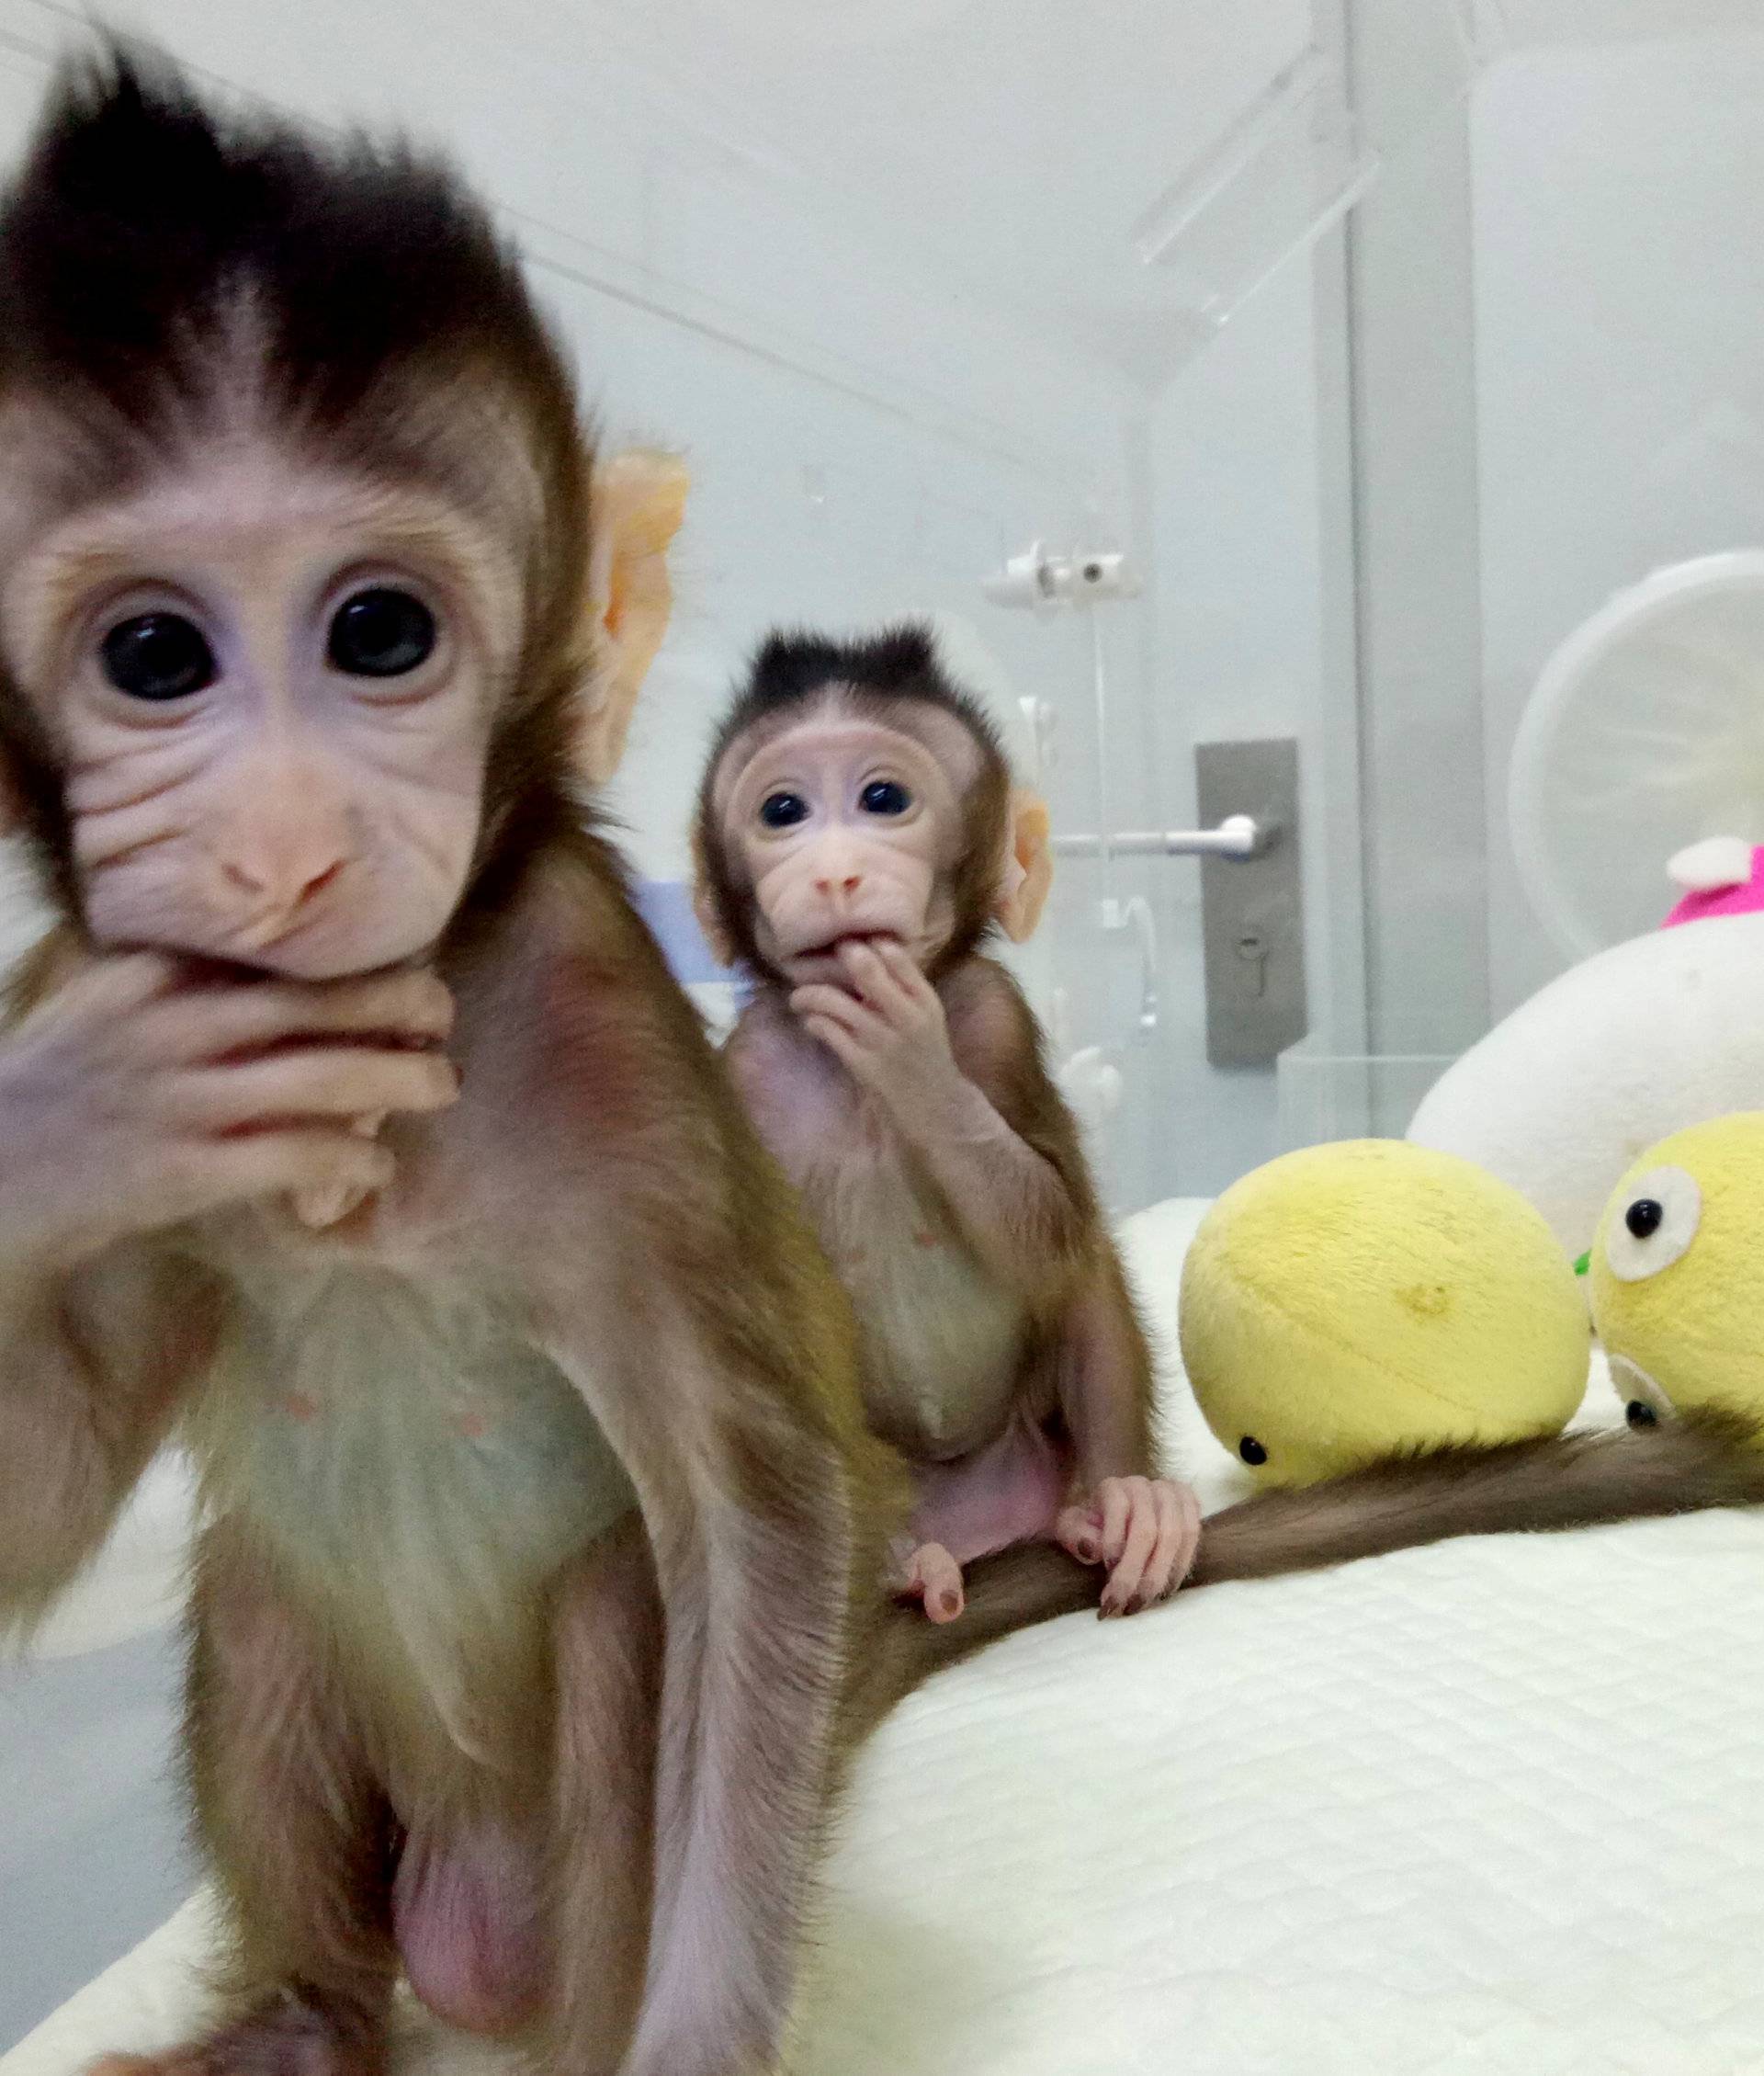 Cloned monkeys Zhong Zhong and Hua Hua are seen at the non-human primate facility at the Chinese Academy of Sciences in Shanghai